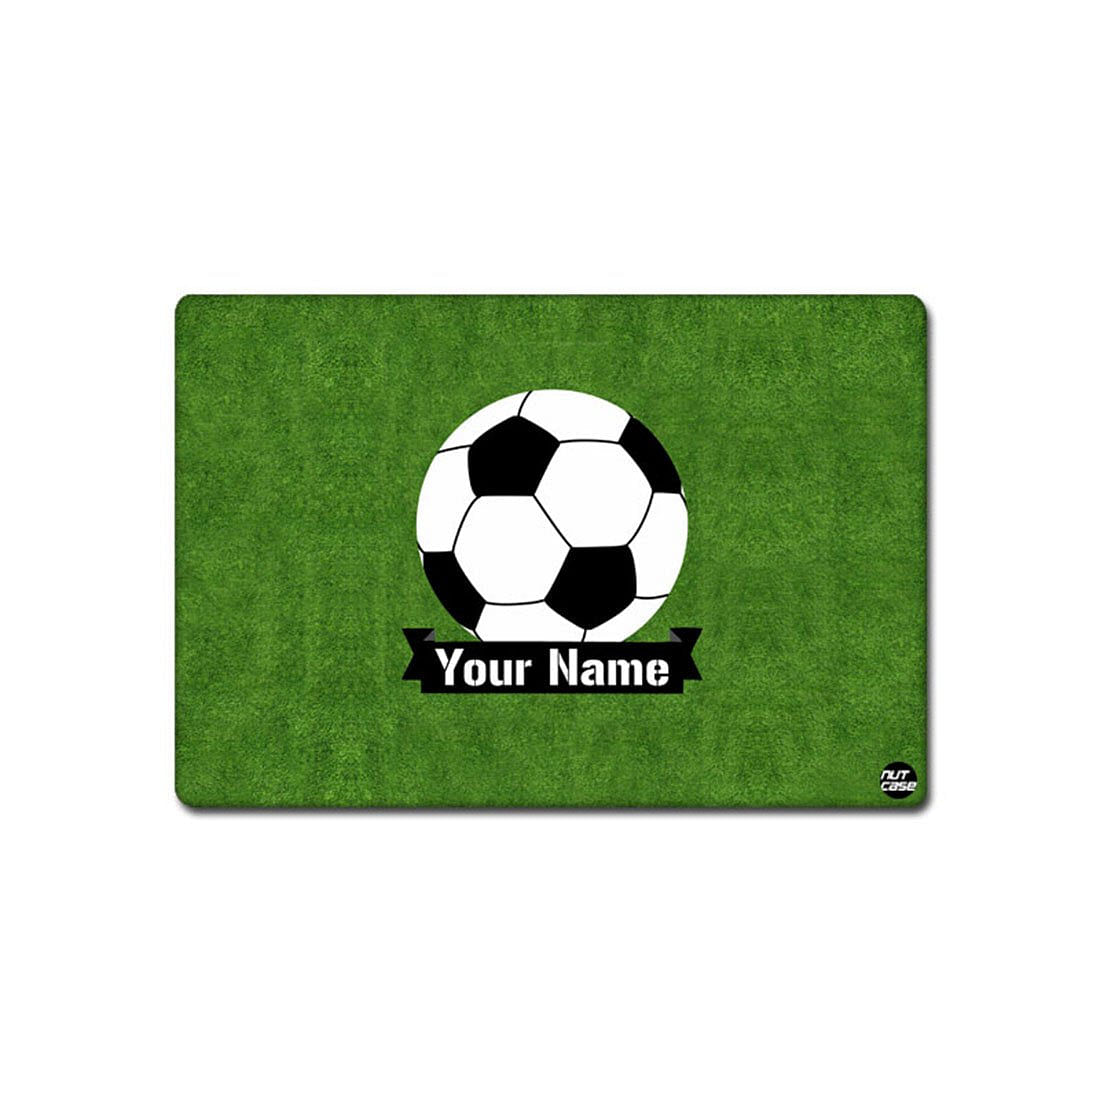 Personalized Table Mats for Kids Party Return Gift Ideas - Football Nutcase